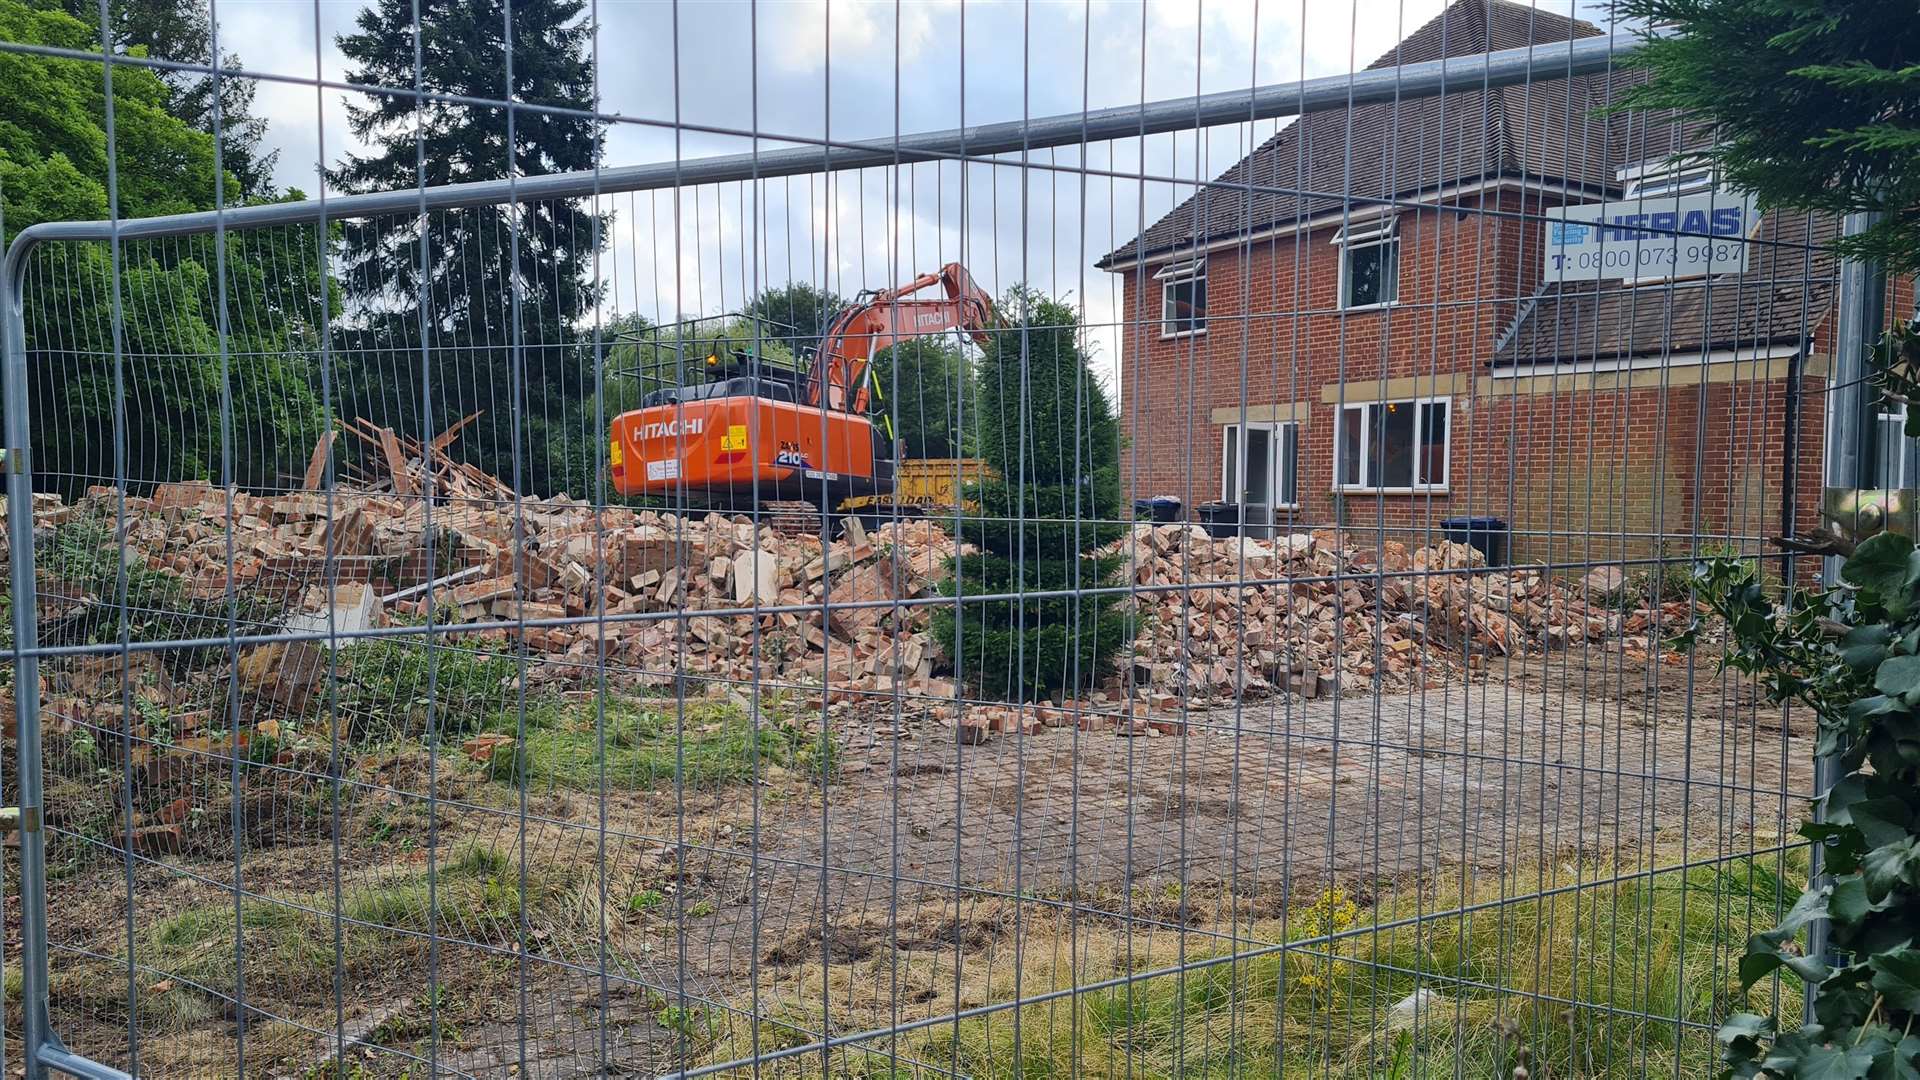 One of the family homes reduced to rubble